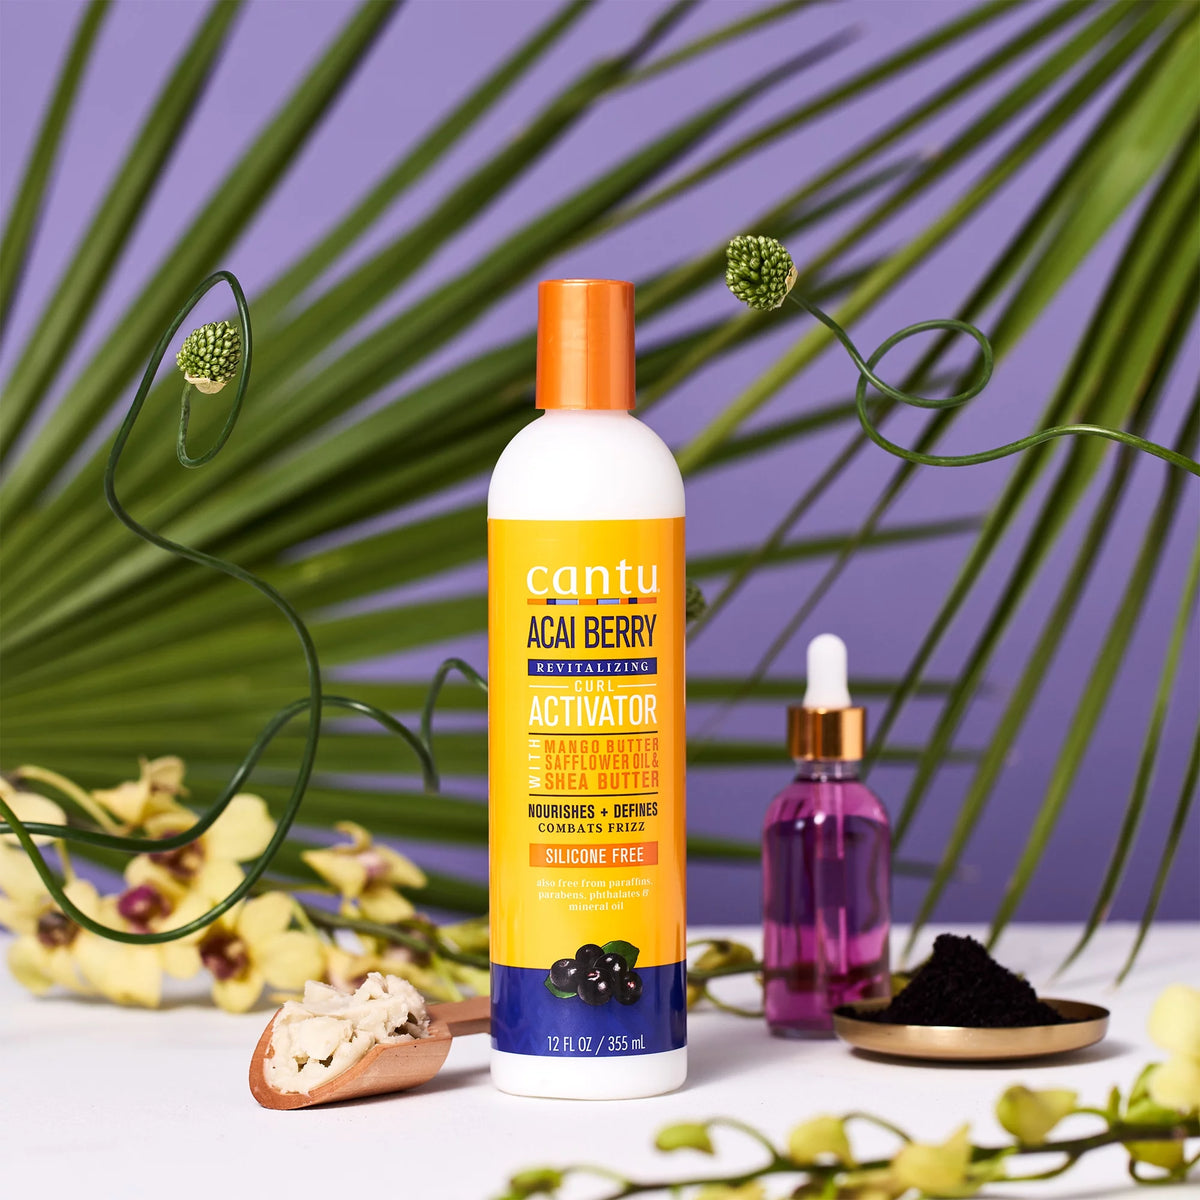 Cantu Revitalizing Curl Activator with Acai Berry and Shea Butter -355ml